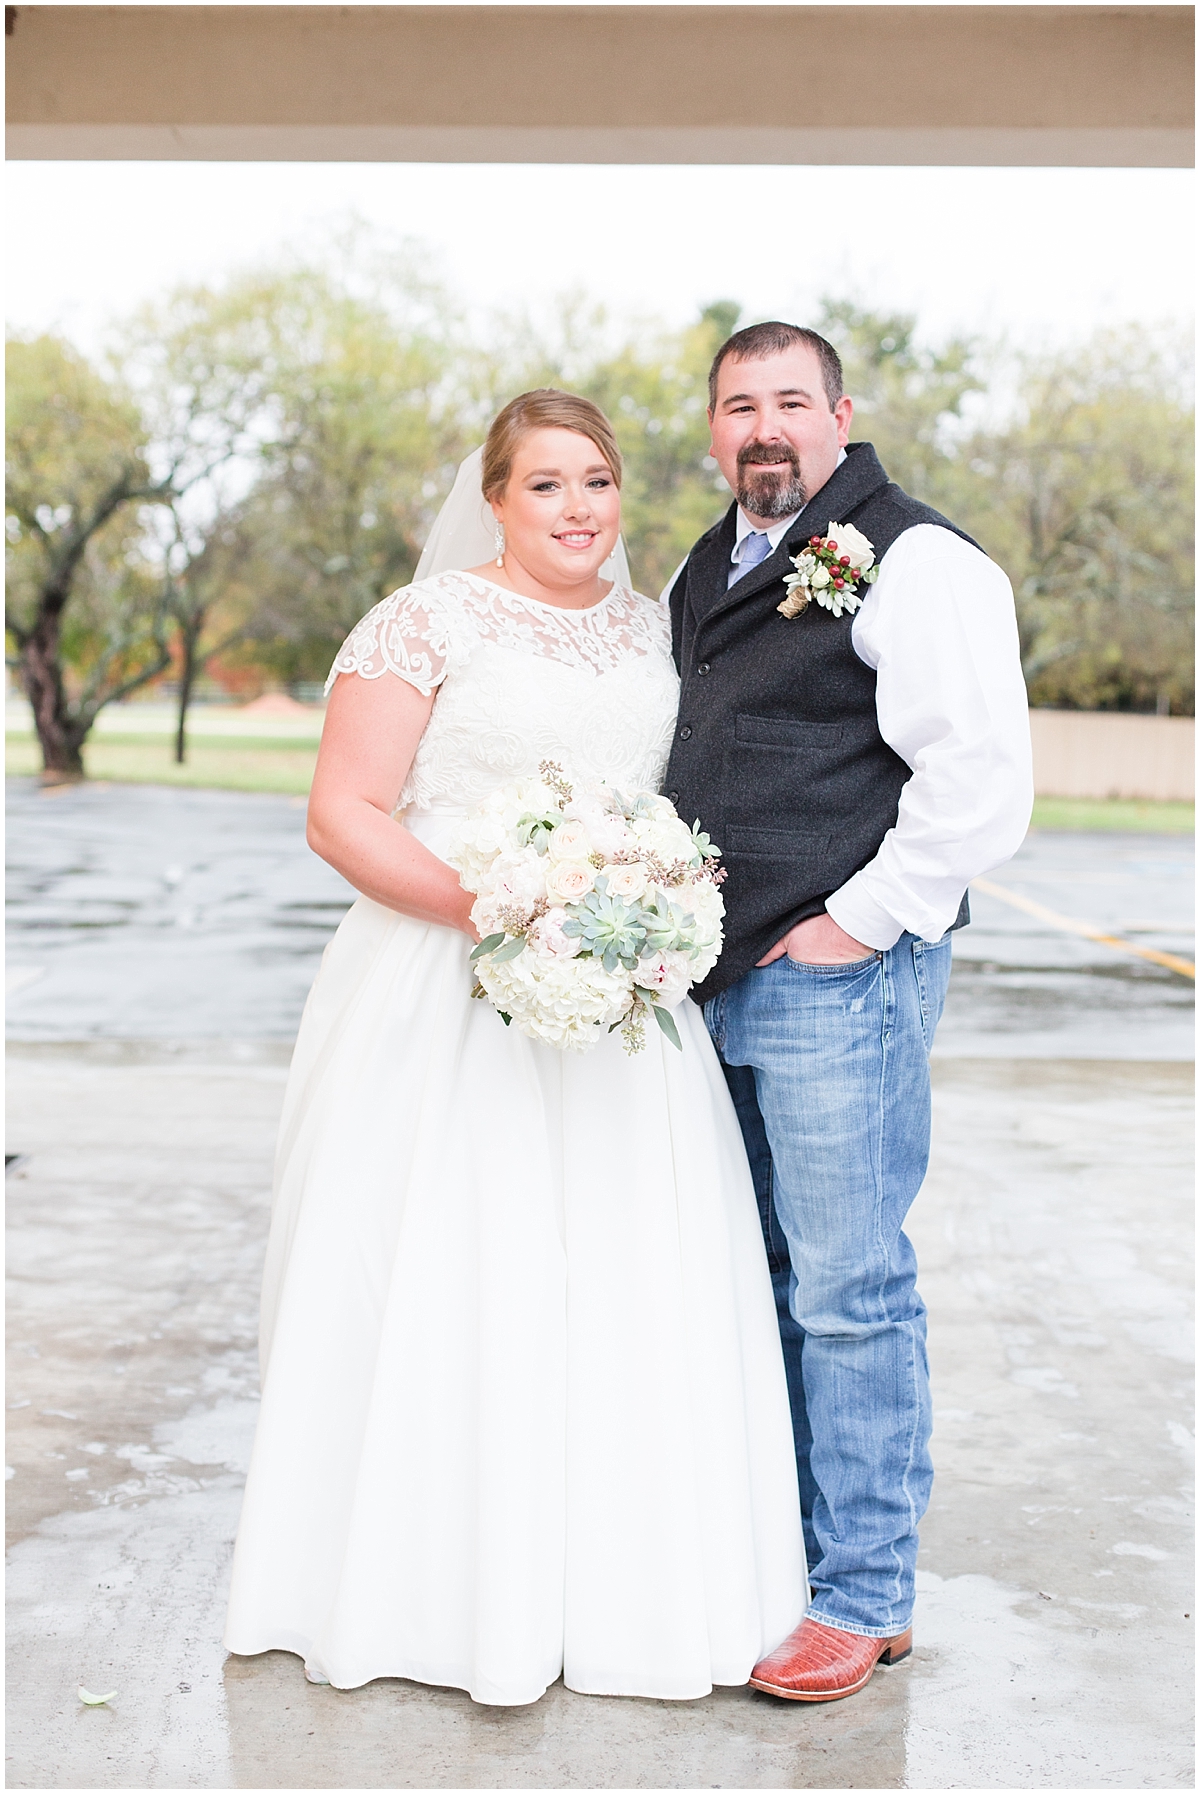 a-charcoal-grey-ivory-burgundy-winter-wedding-at-bethany-lutheran-church-in-fredericksburg-texas-by-allison-jeffers-wedding-photography-fredericksburg-wedding-photographer_0054